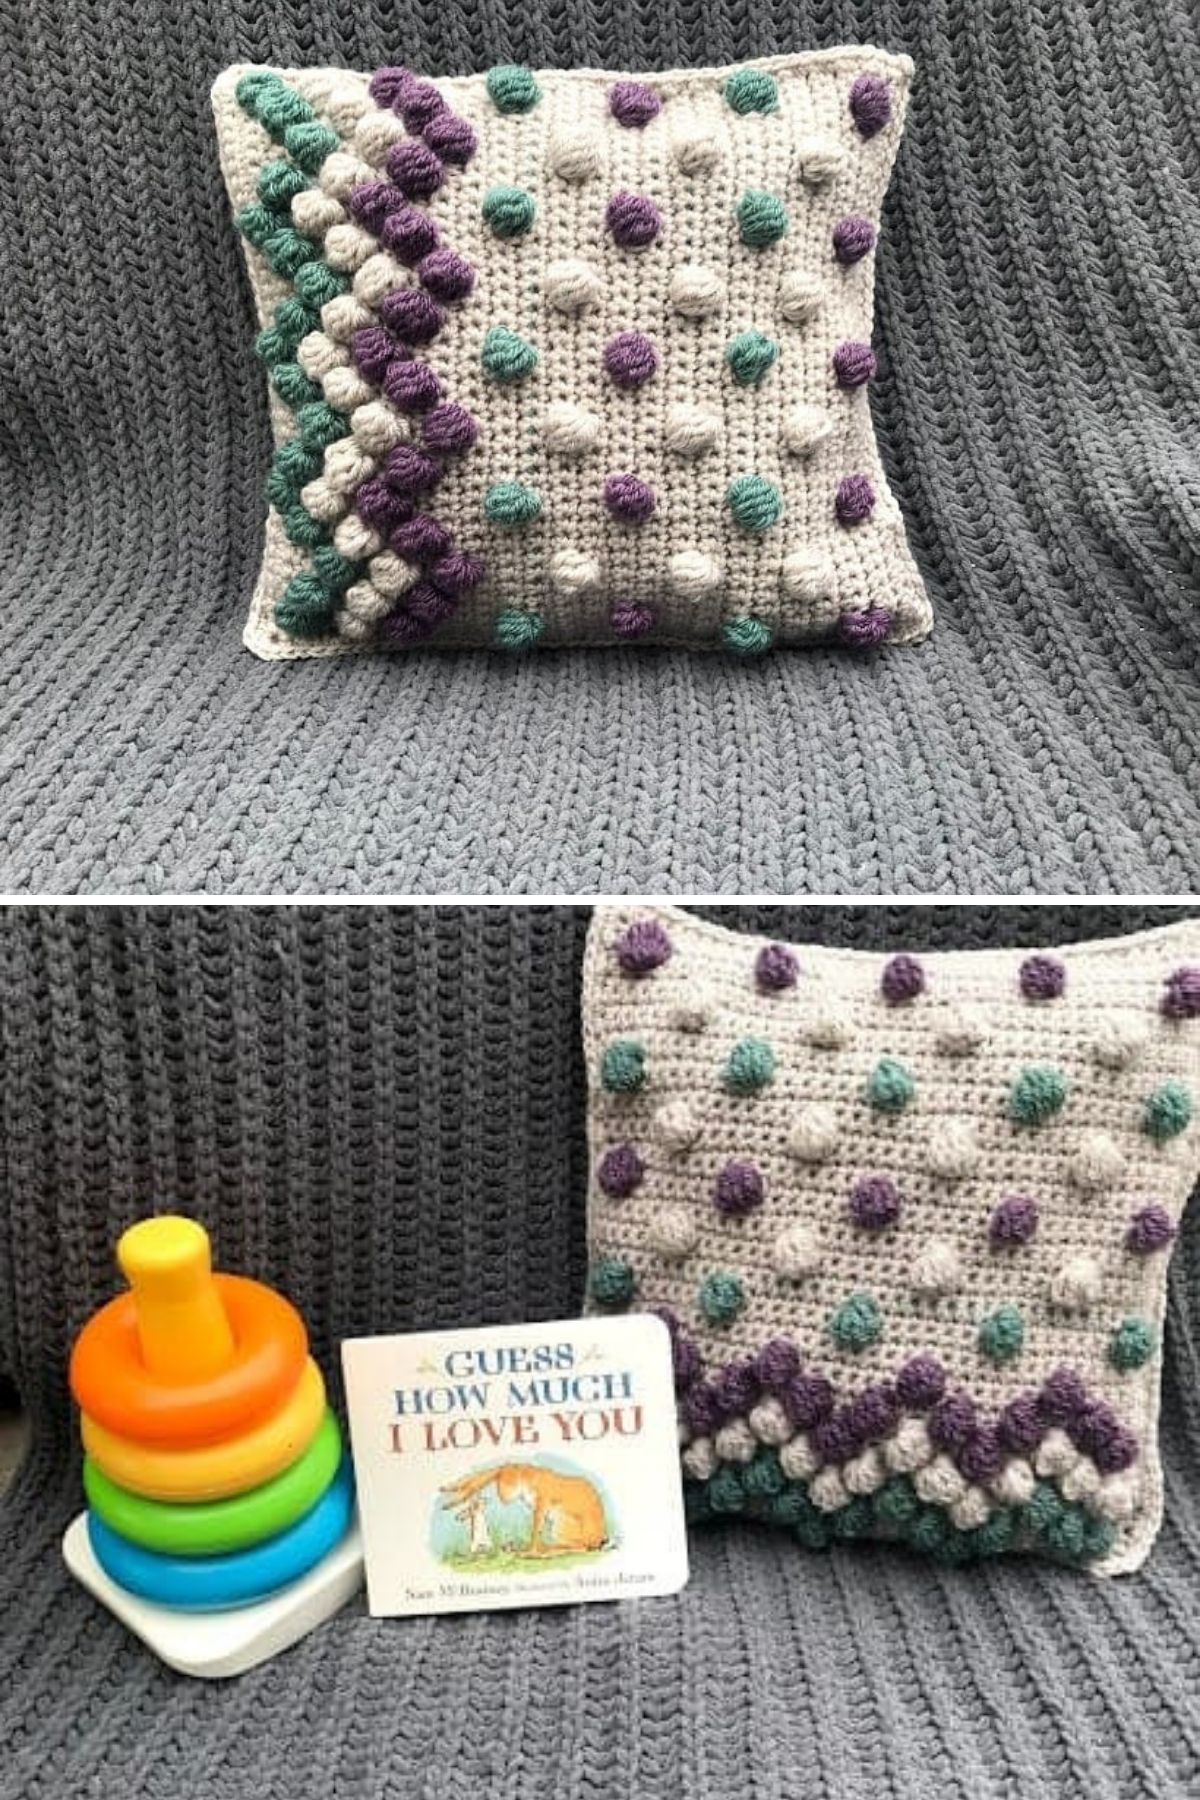 Cream pillow with purple and teal bobbles in a zig zag